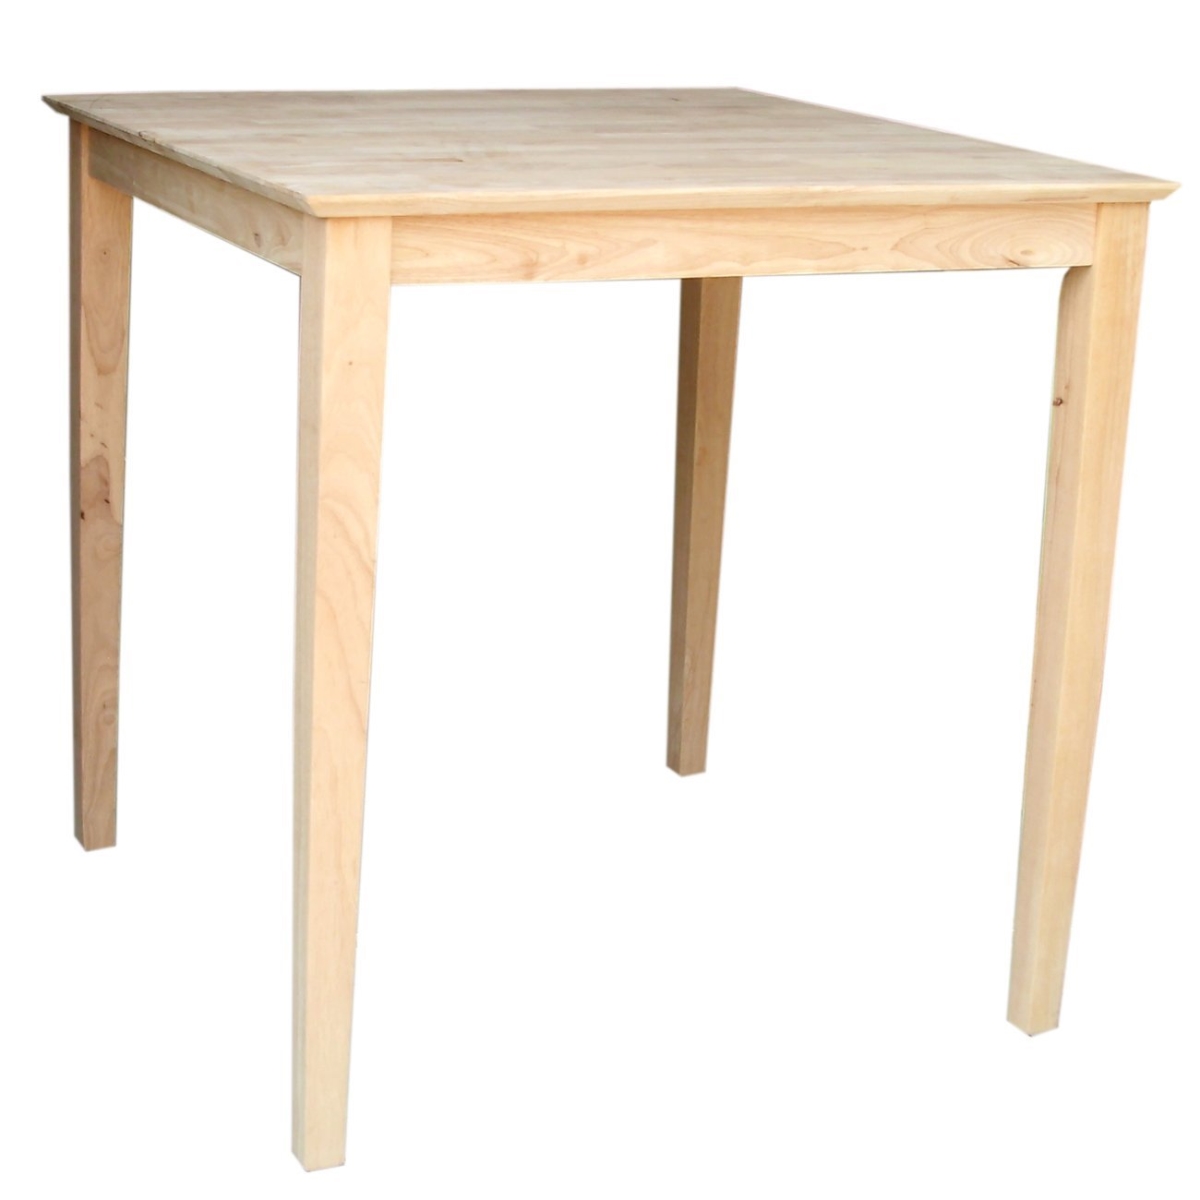 Picture of InternationalConcepts INTC664 Solid Wood Top Table - Shaker Legs